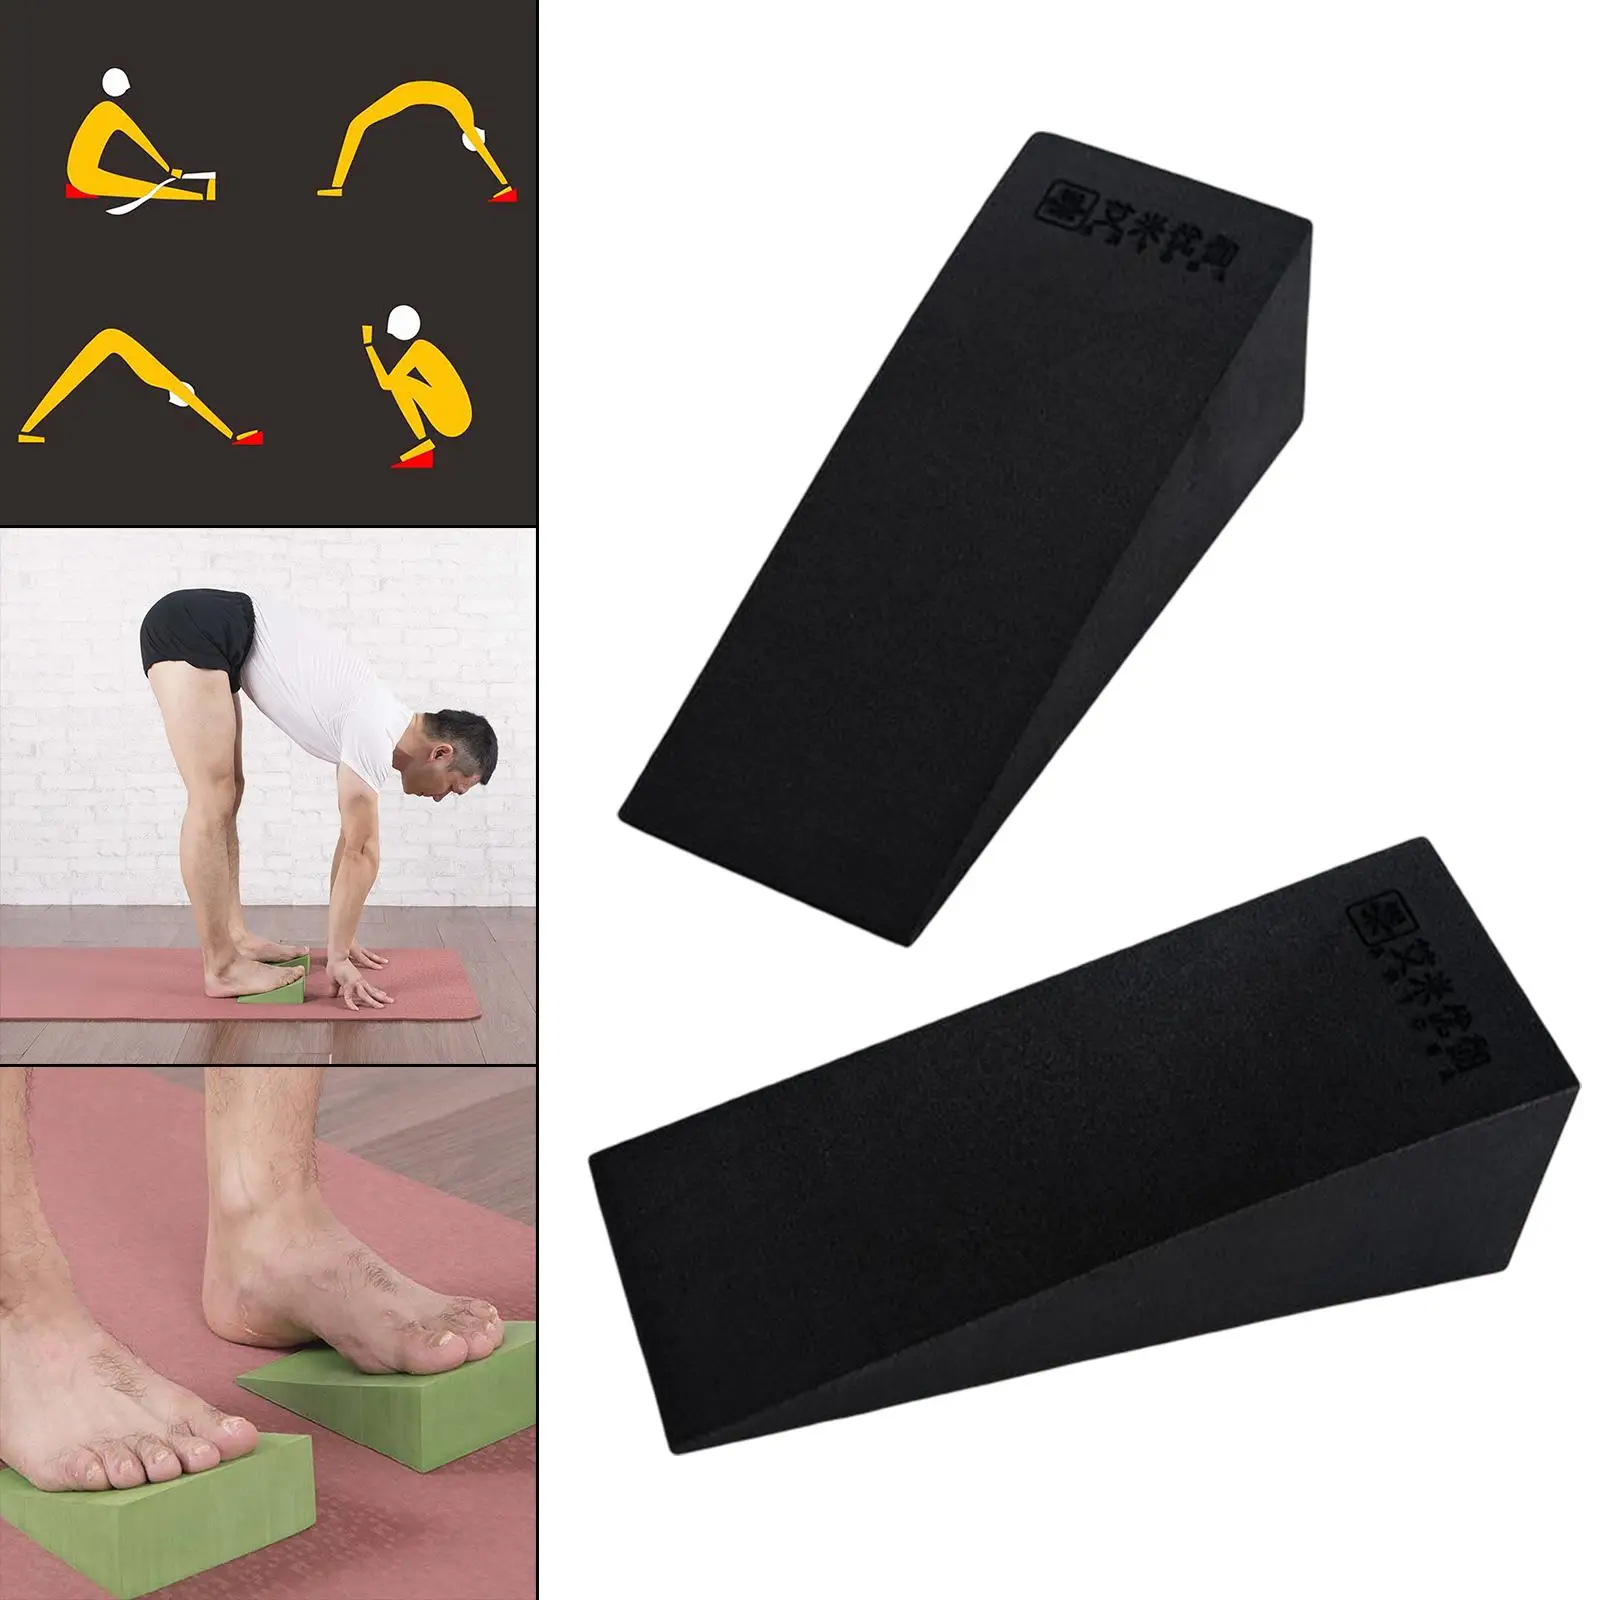 Yoga Blocks Accs Wrist Wedge Riser Block Inclined Board for Stretching Plank